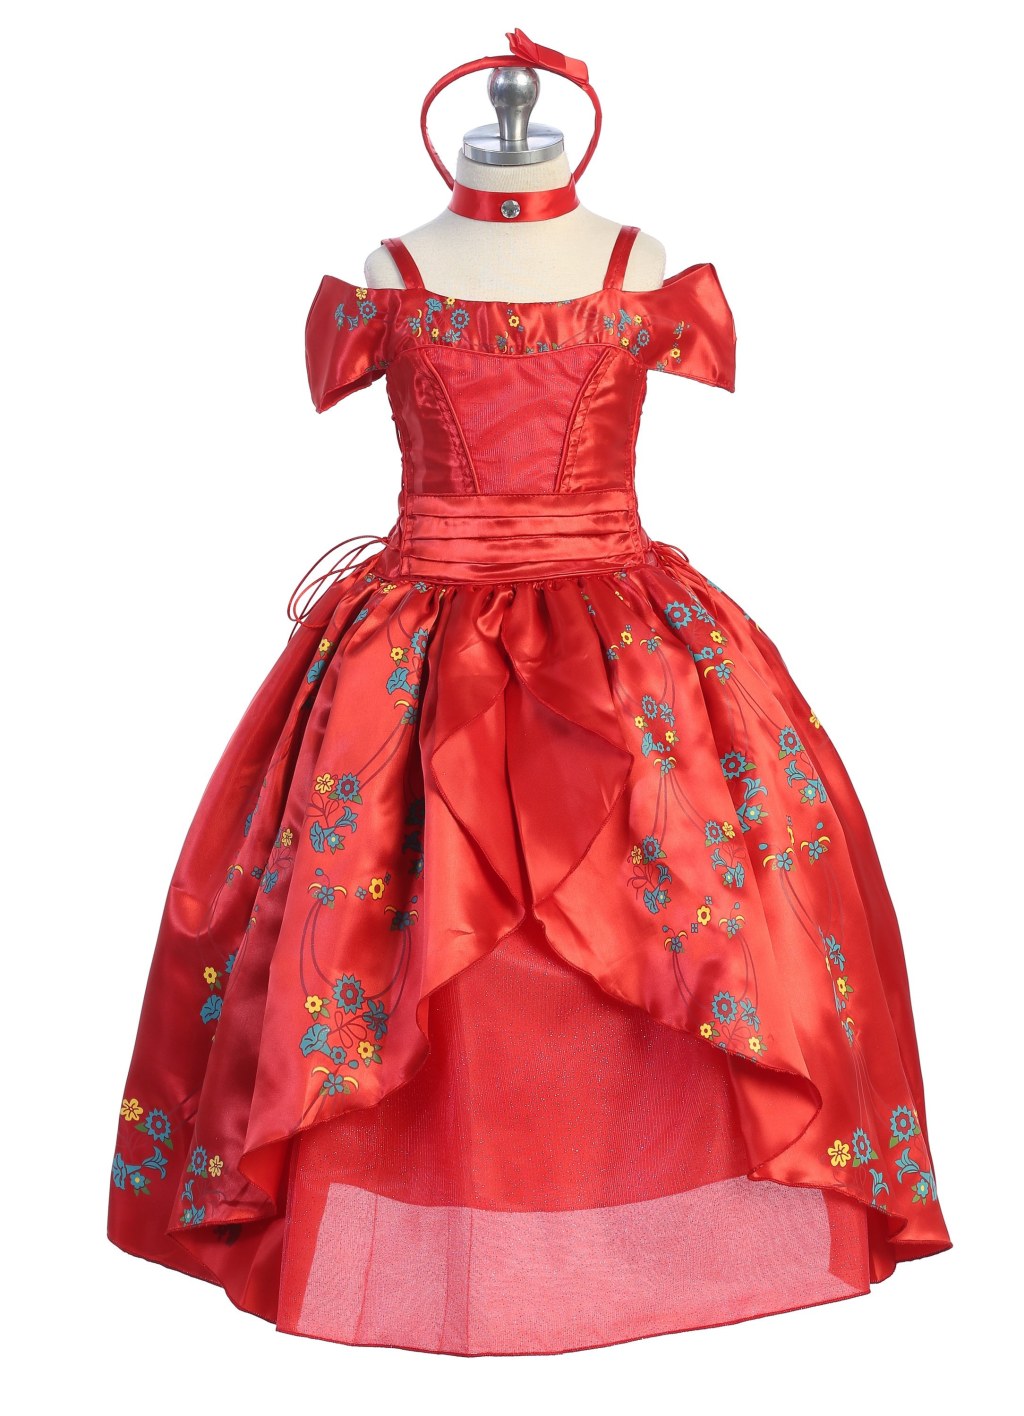 Picture of: Elena Dress / Disney Inspired Princess Elena of Avalor Inspired Costume /  Ball gown style for toddler, child, girl Princess Costume